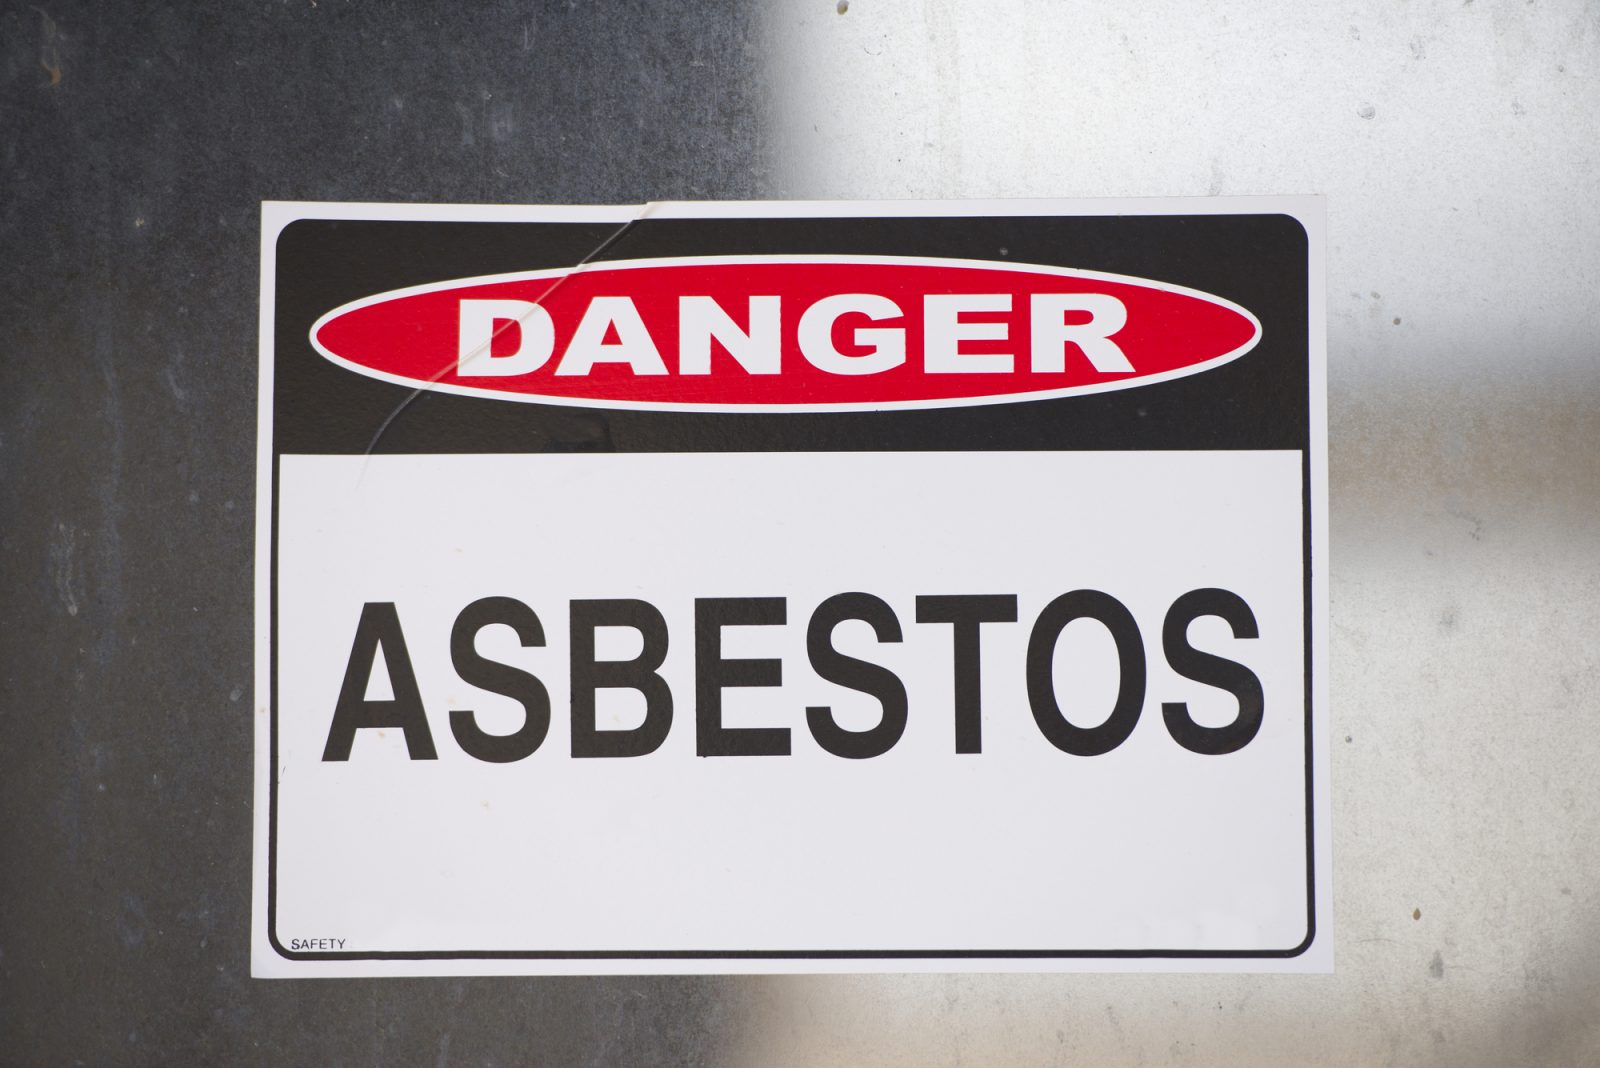 What are the dangers of asbestos?